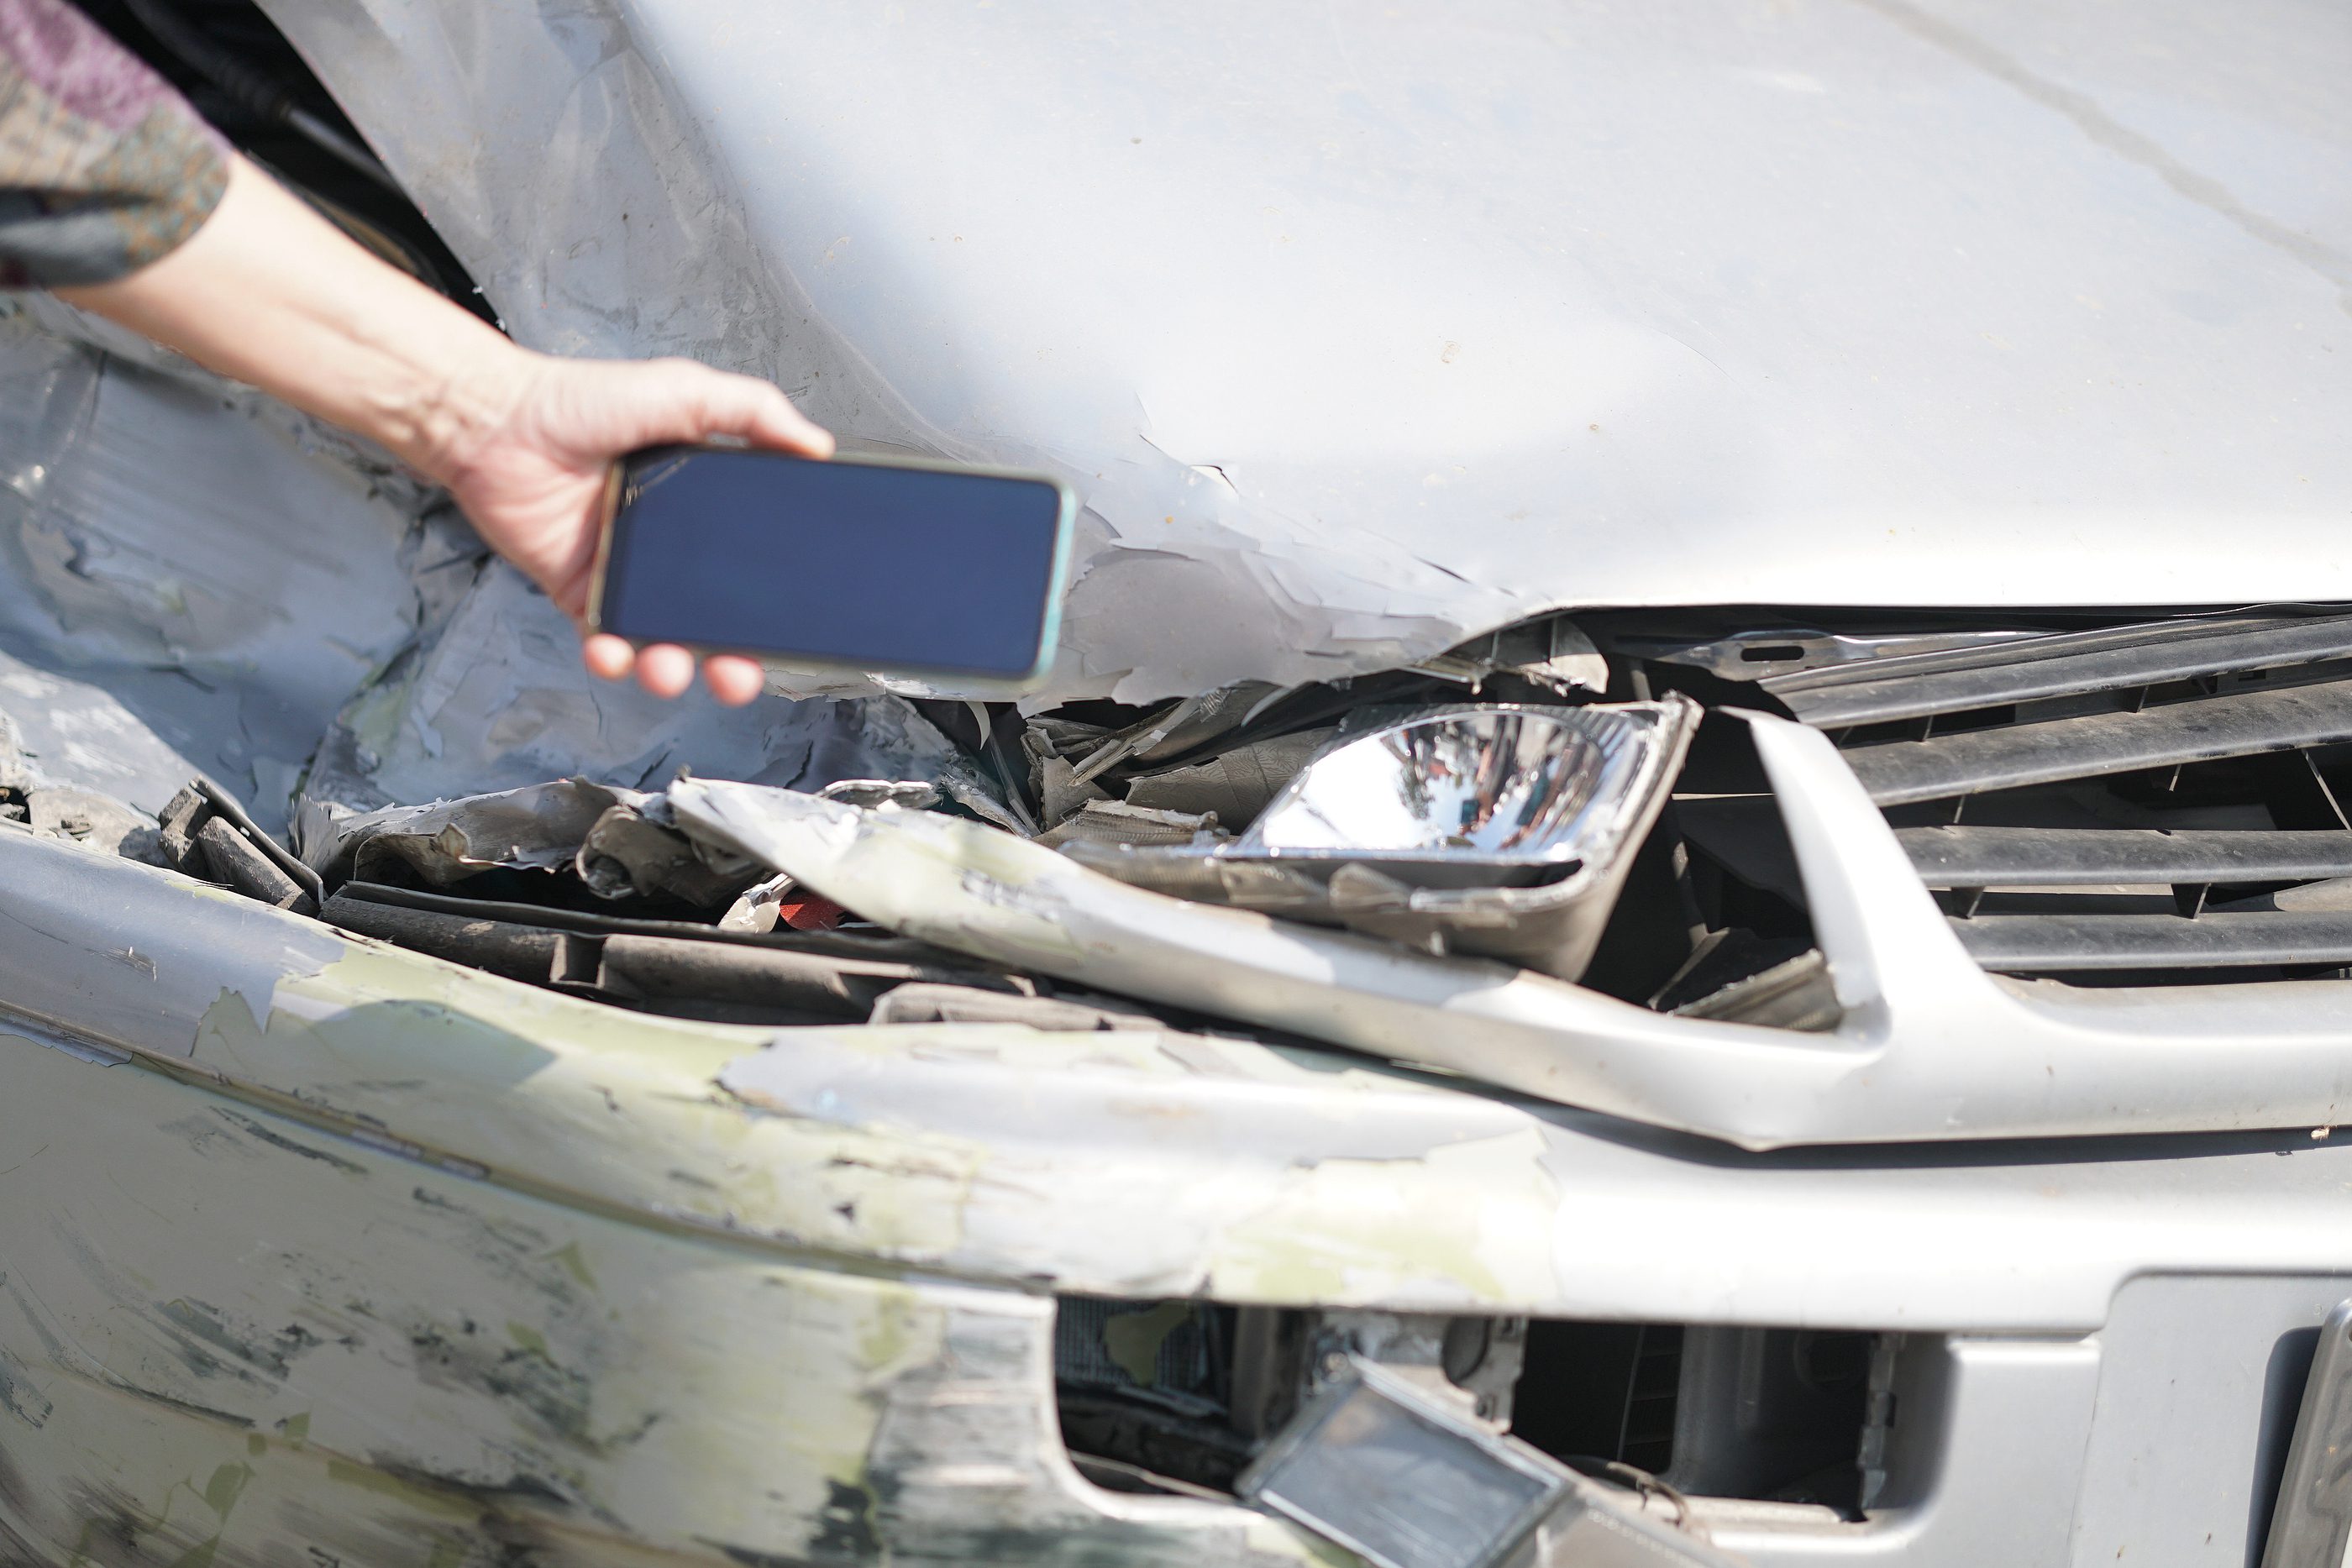 What Are My Options For Seeking Compensation After An Auto Accident?